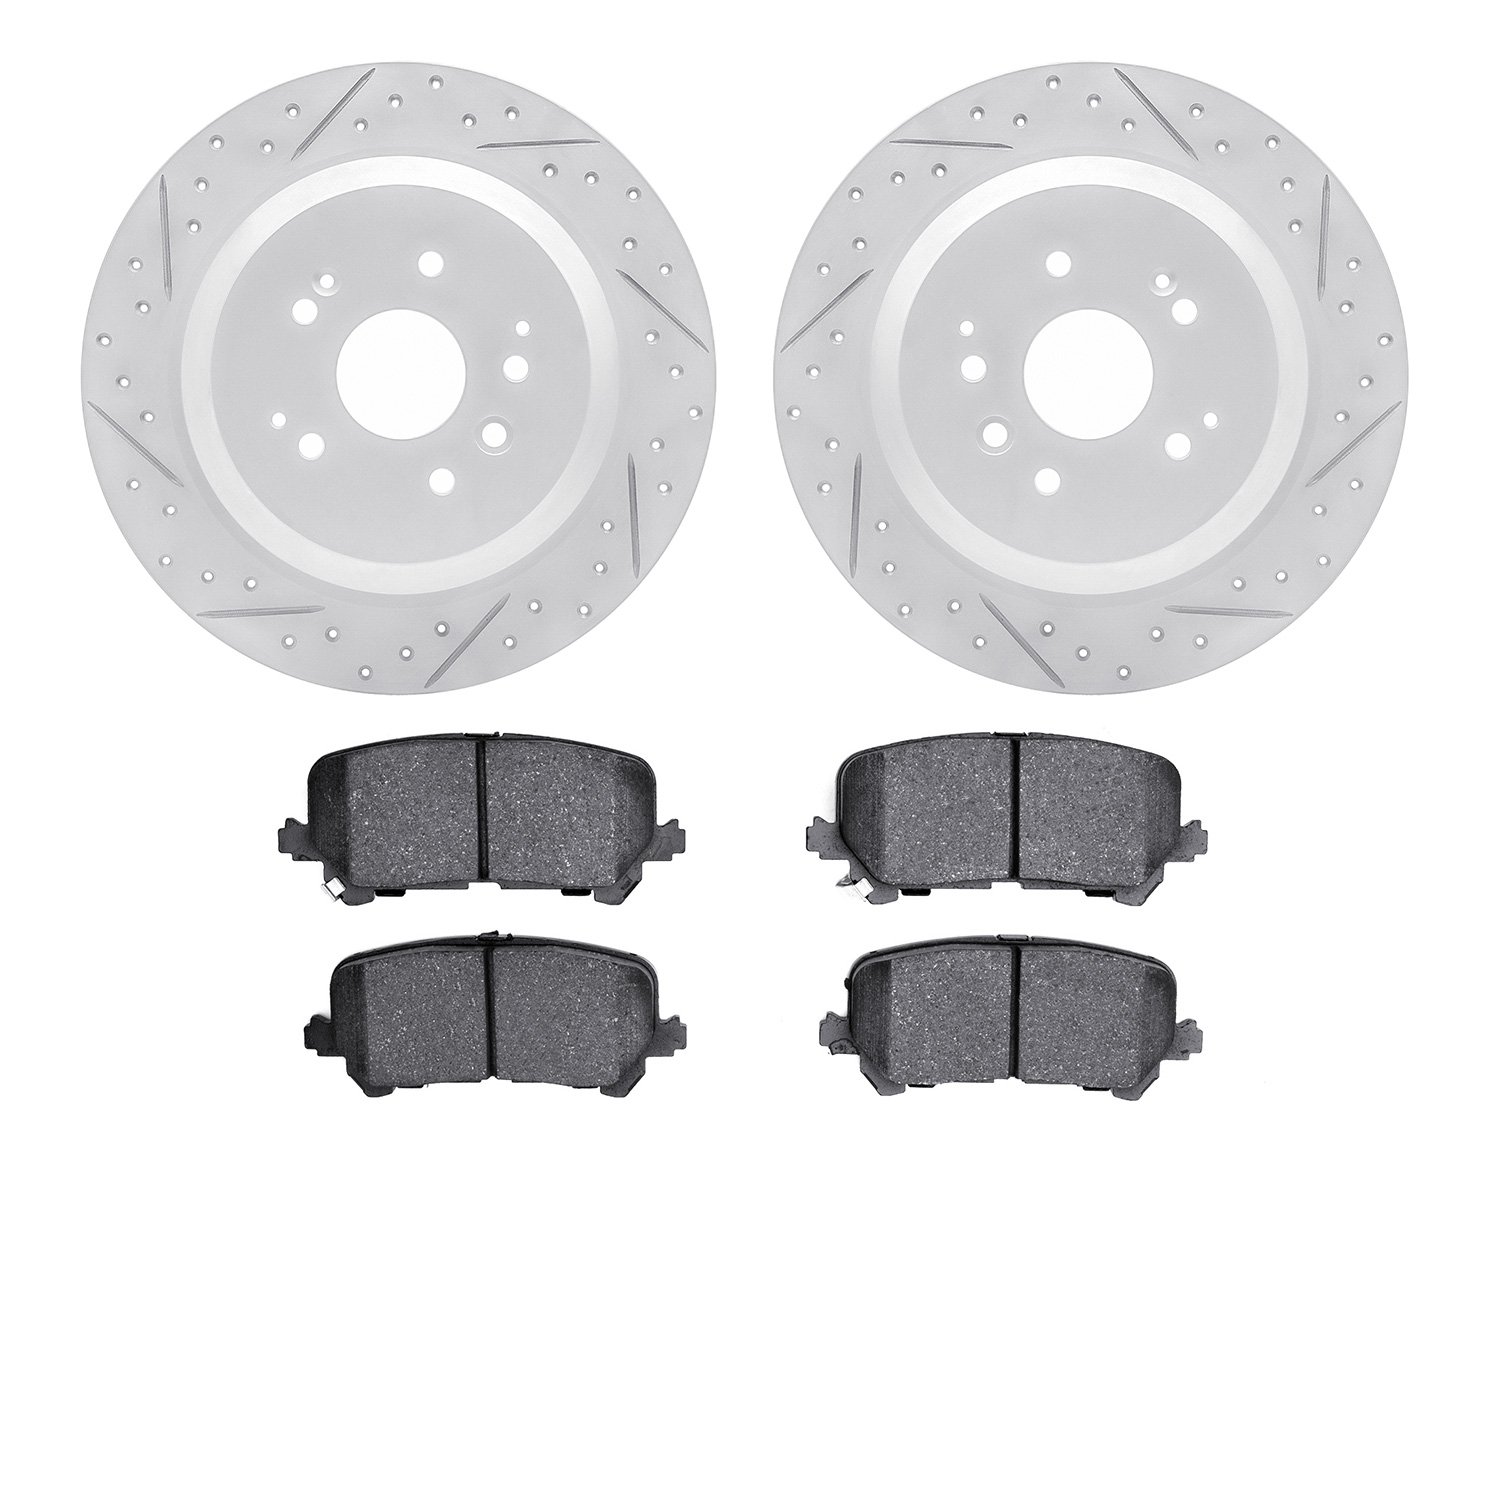 2502-58033 Geoperformance Drilled/Slotted Rotors w/5000 Advanced Brake Pads Kit, 2014-2016 Acura/Honda, Position: Rear